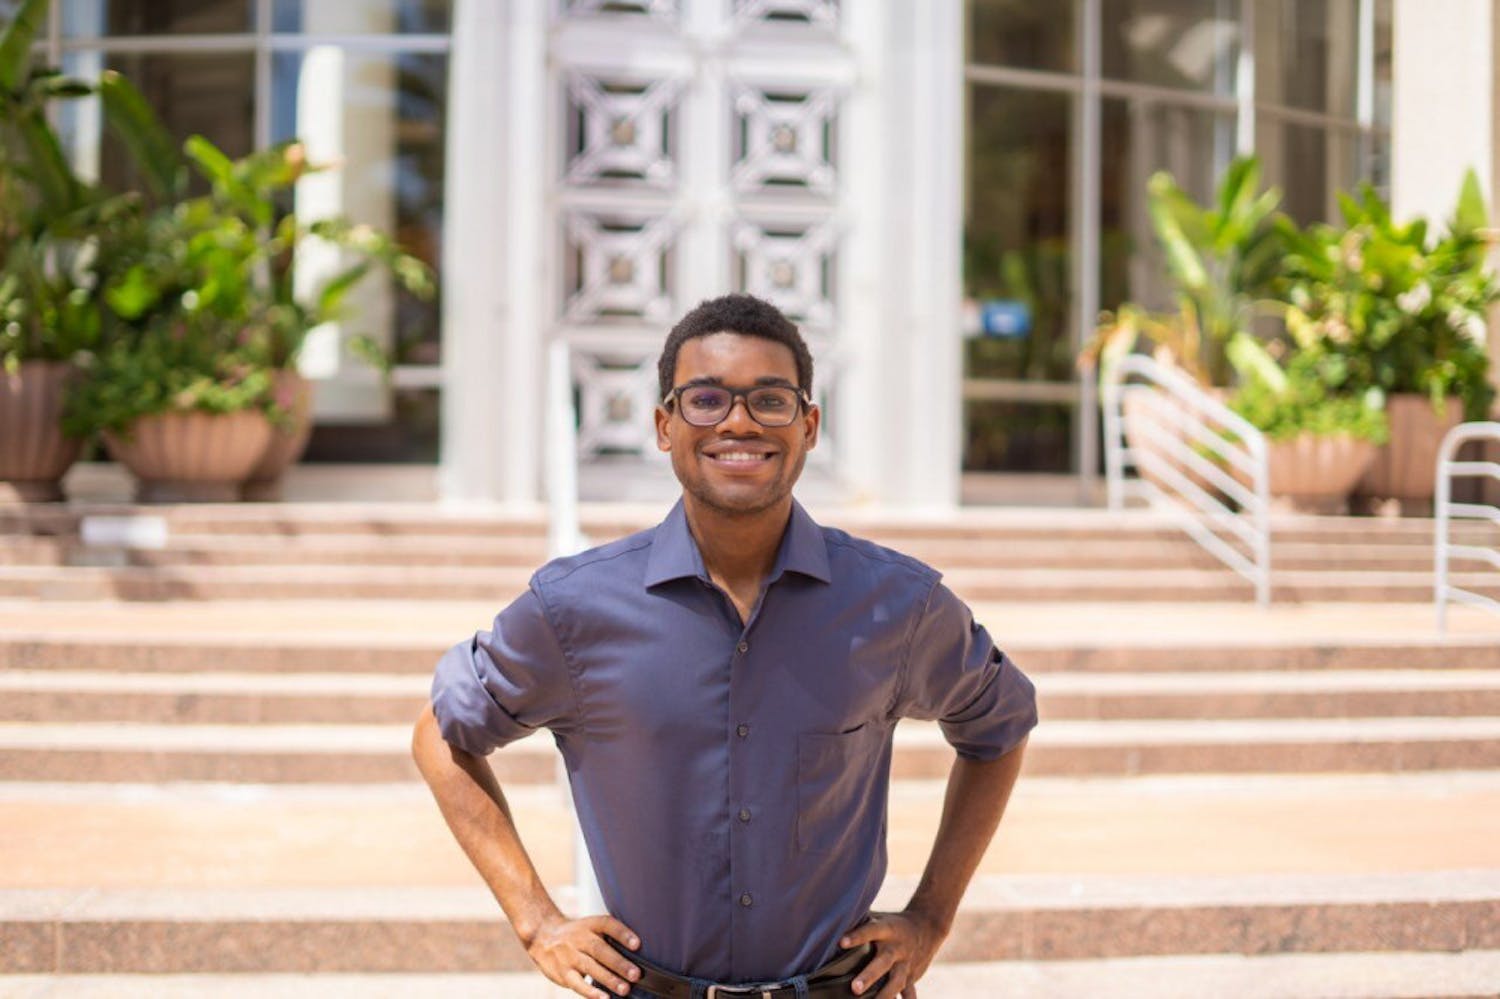 Nate Douglas, an Orlando native and UF economics junior, became&nbsp;Orange County’s Soil and Water Conservation District 1&nbsp;supervisor-elect on Nov. 3.